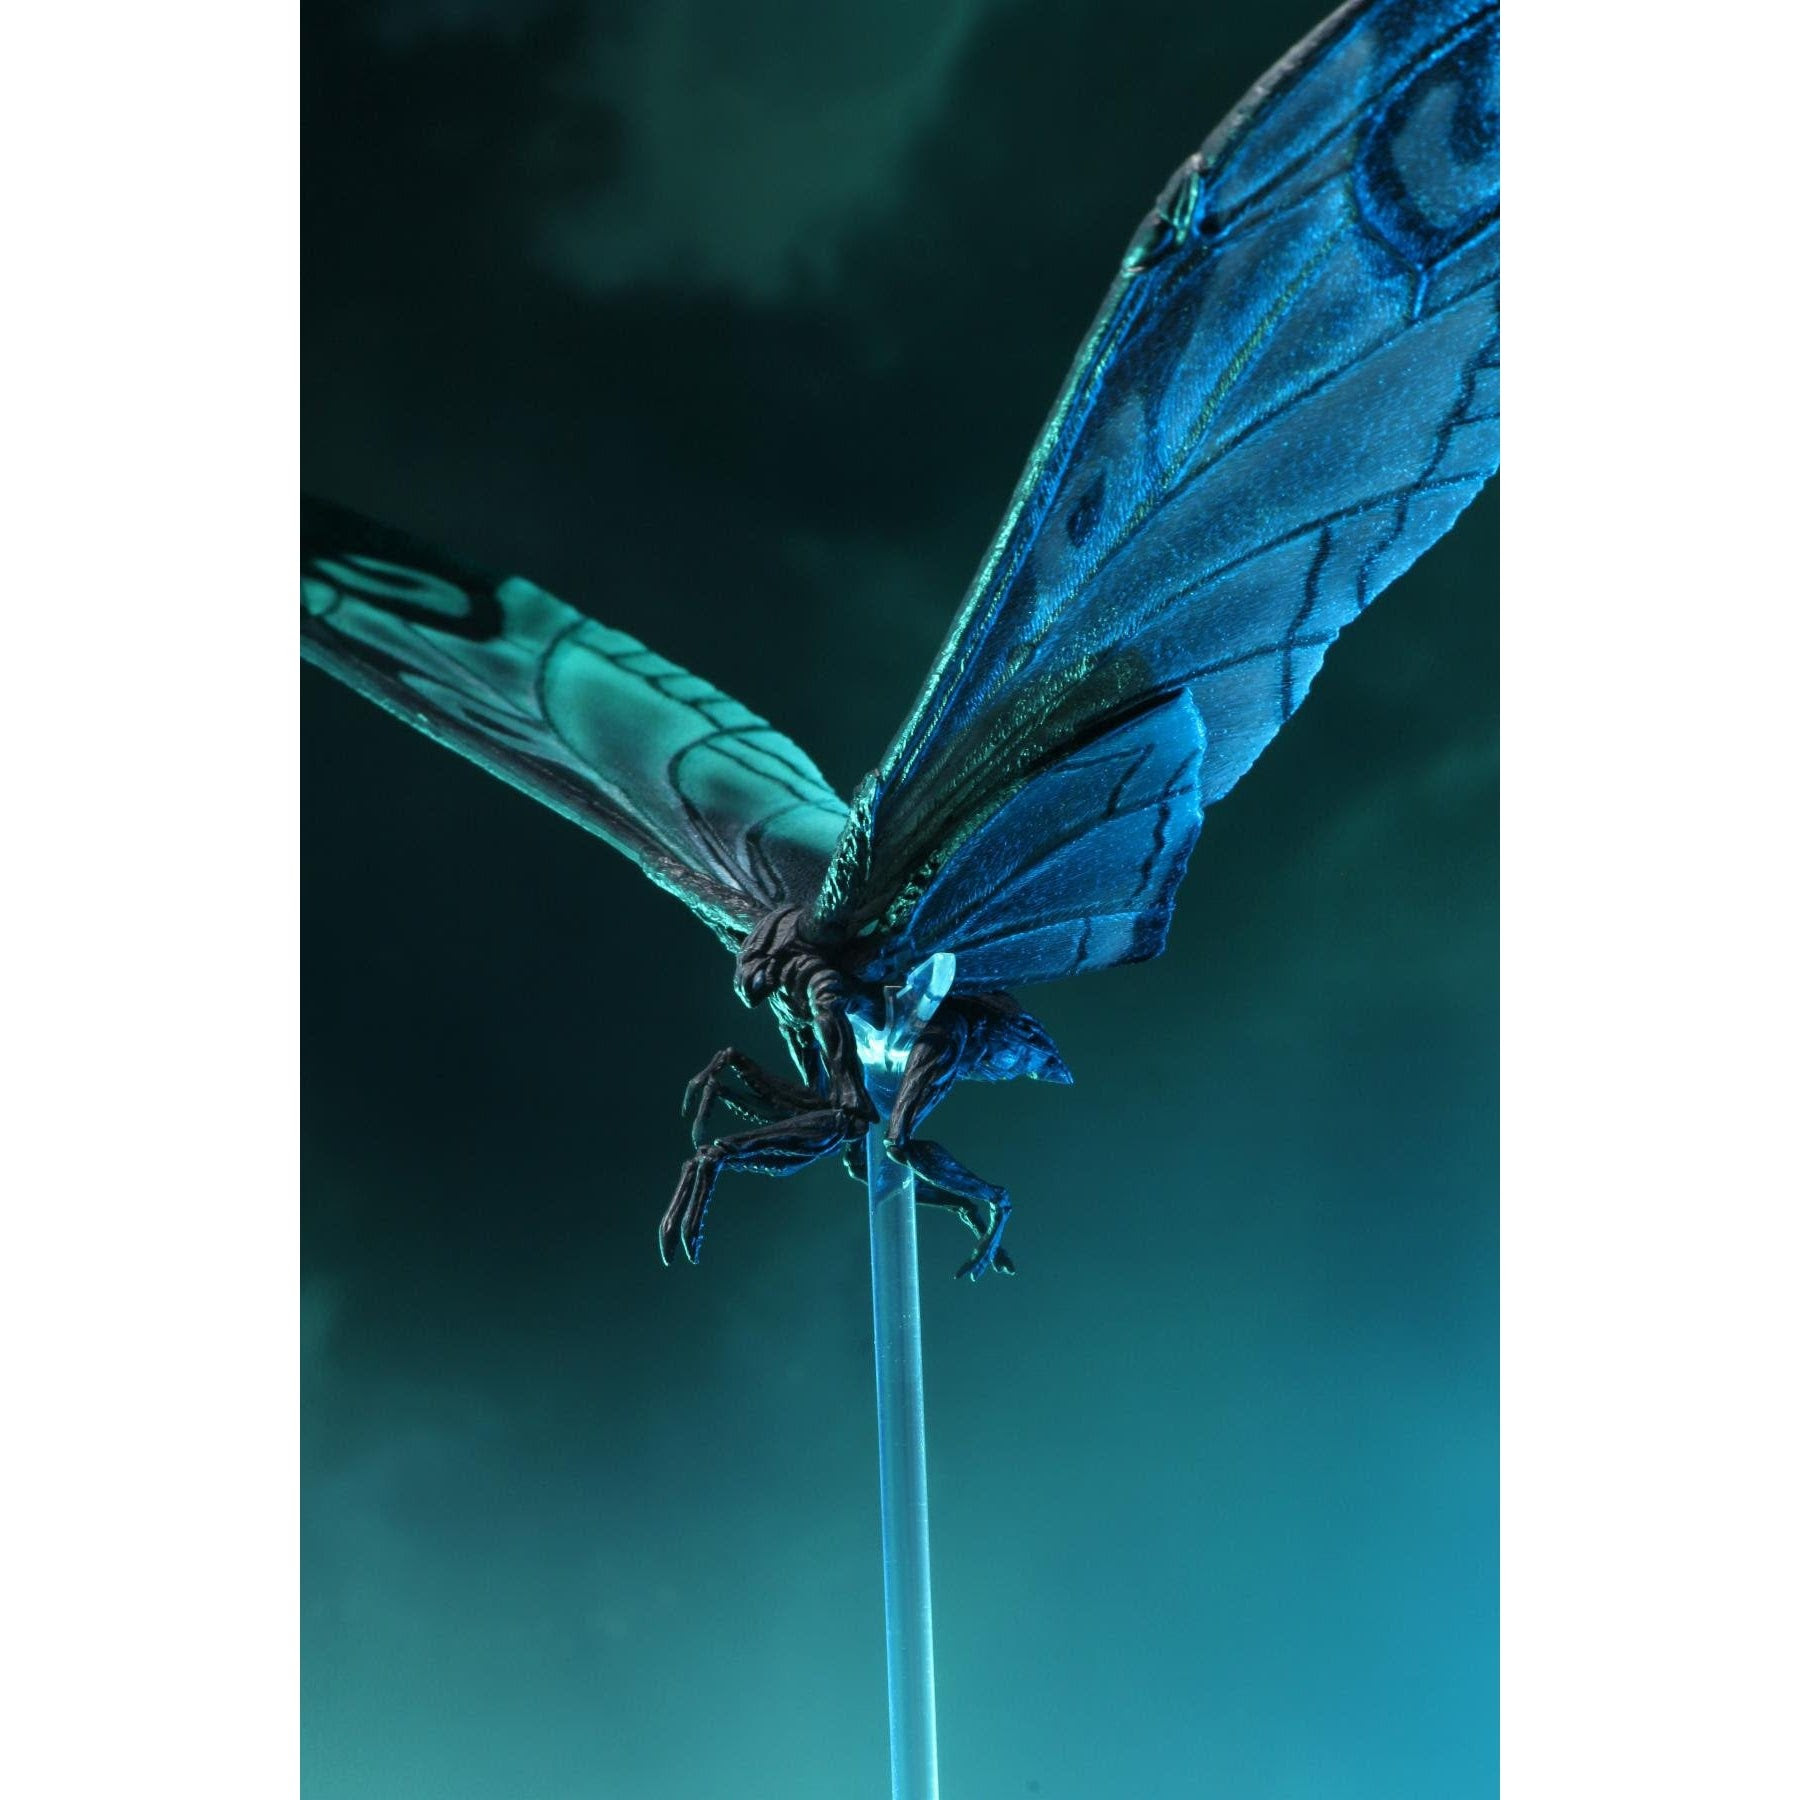 Image of Godzilla - King of Monsters - 12" Wing-to-Wing Action Figure - Mothra "Poster Version"